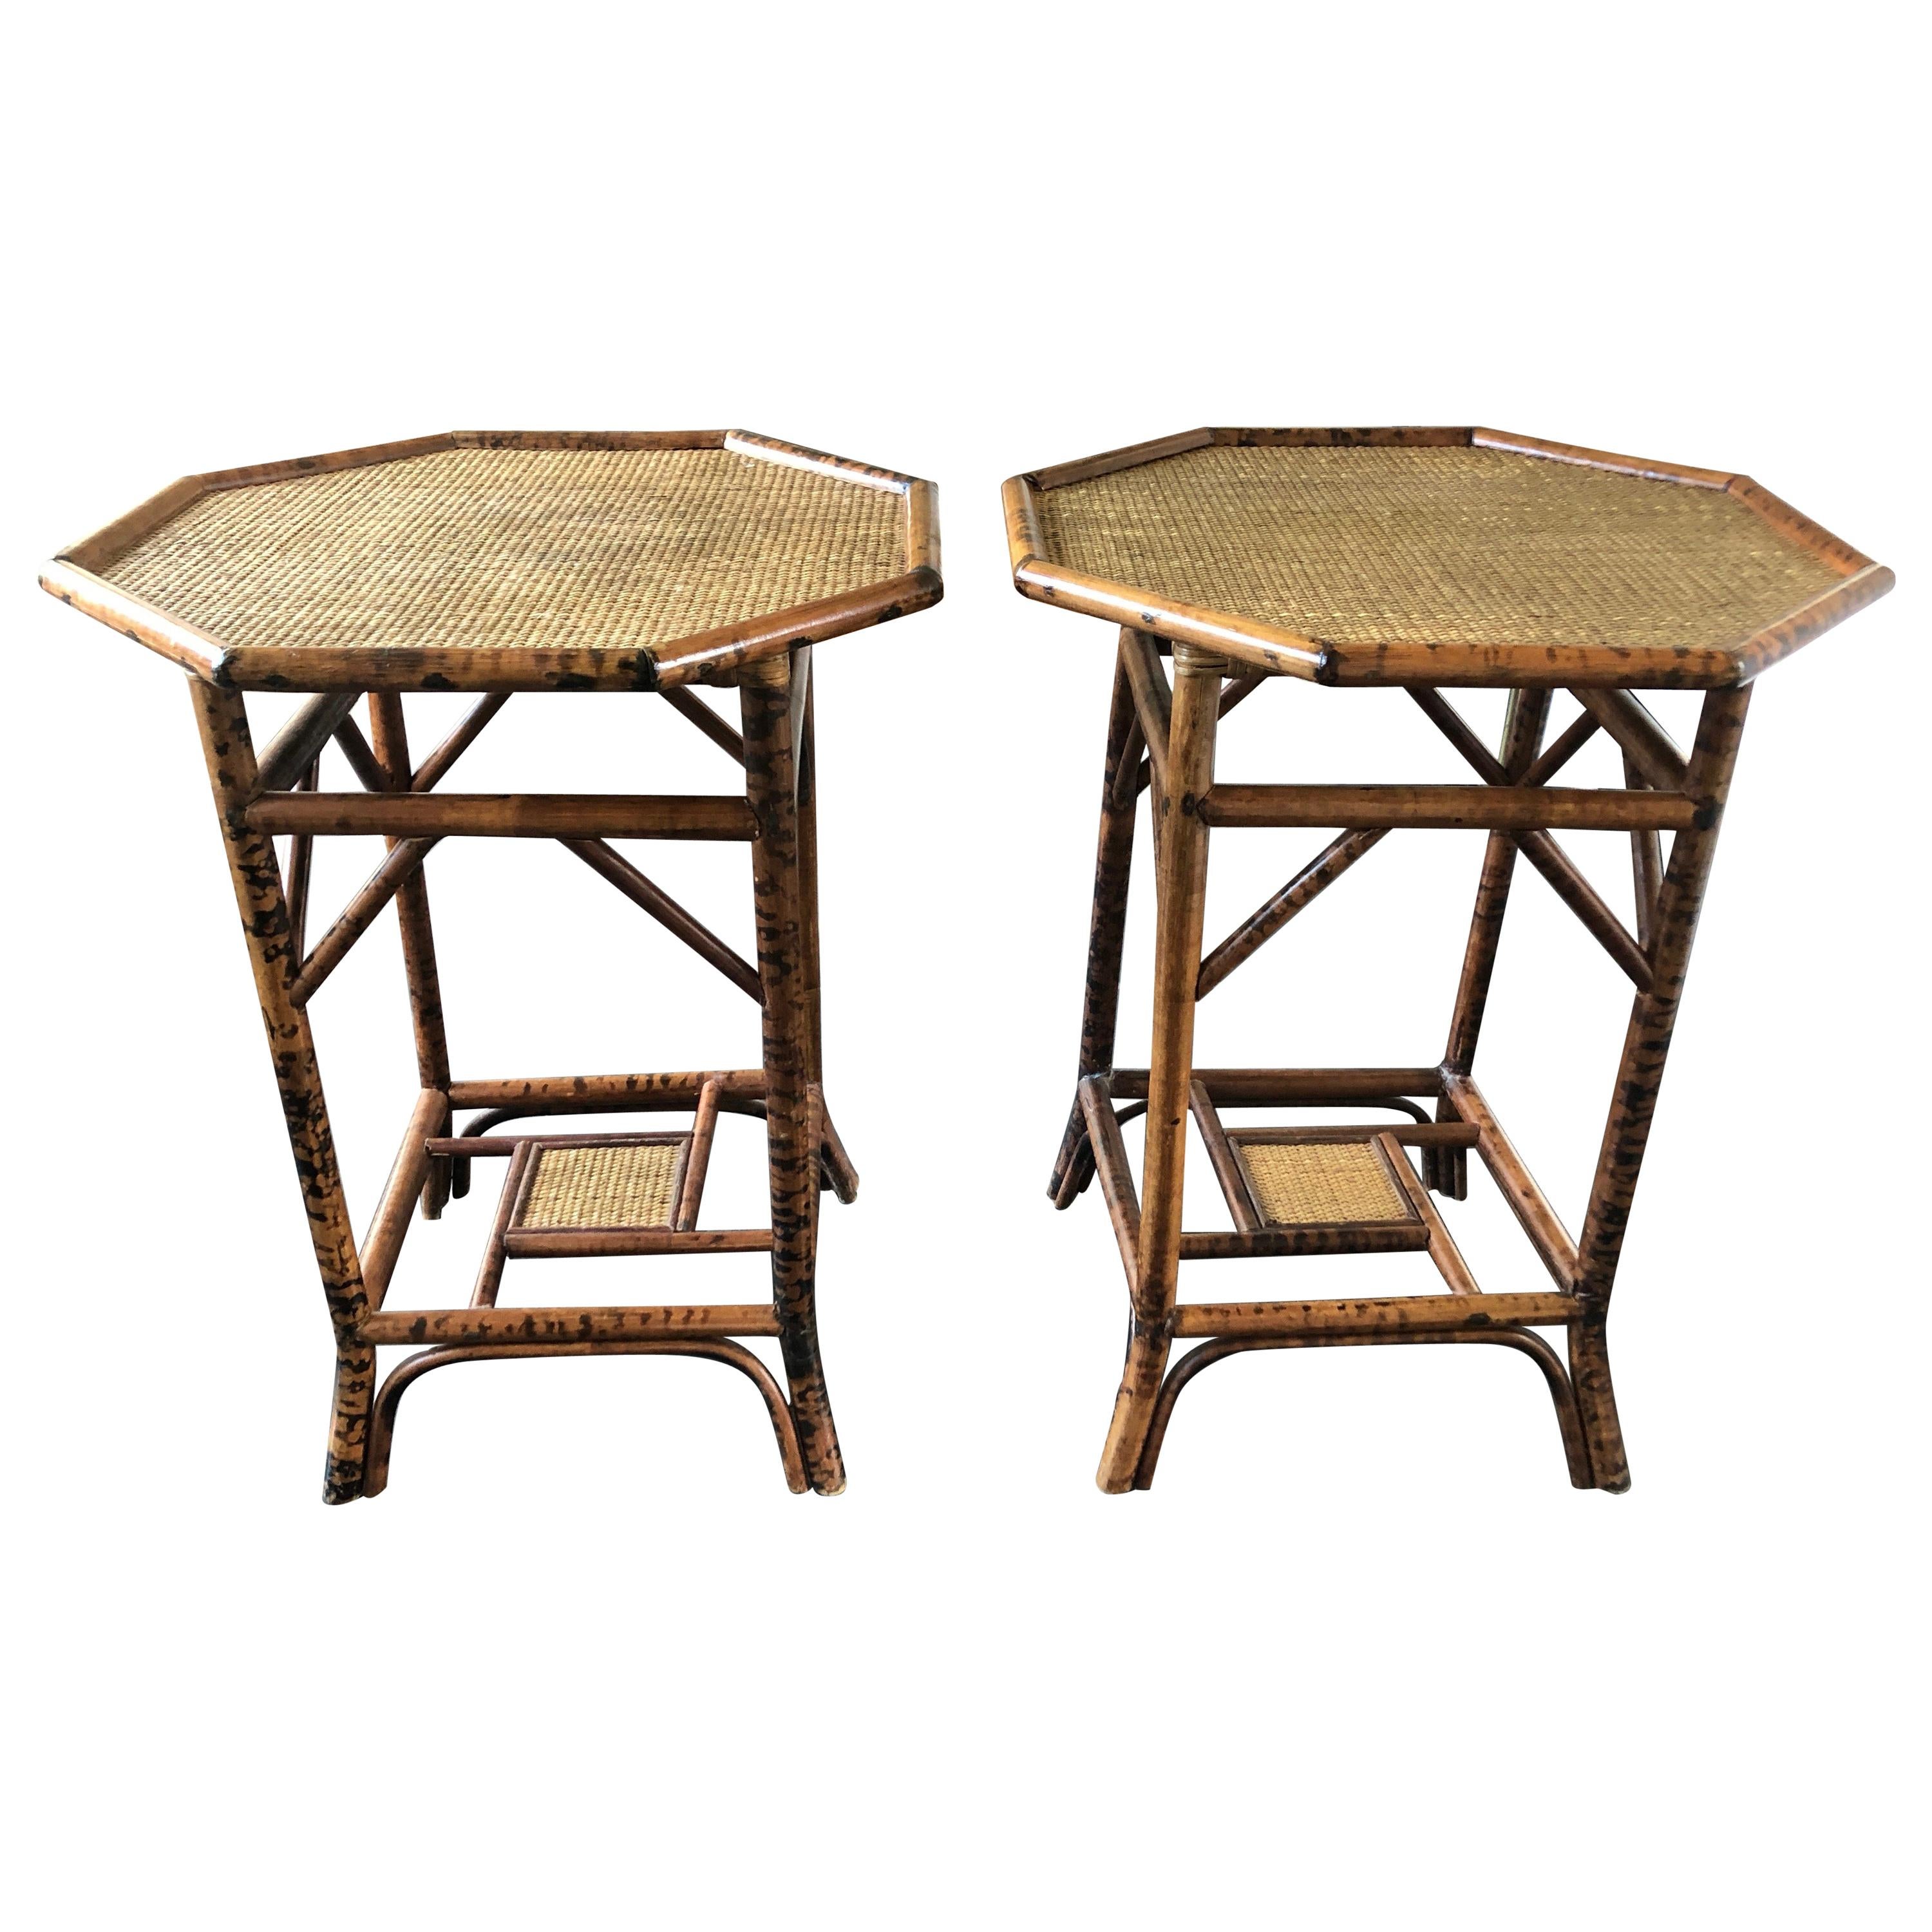 Stylish Rattan and Bamboo Octagonal Side Tables